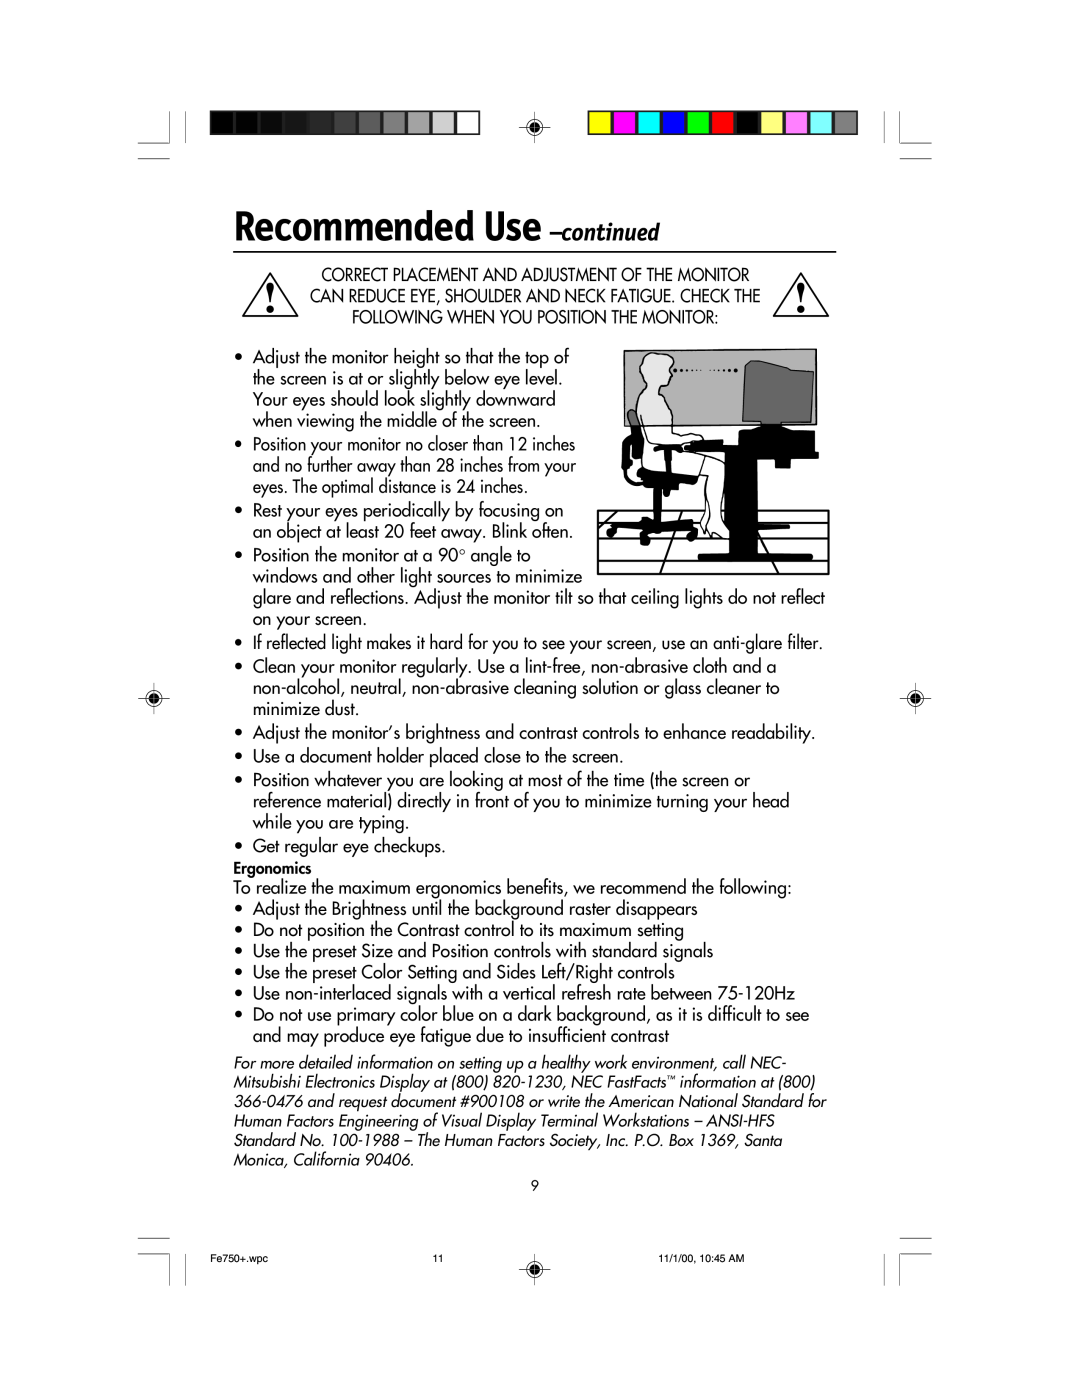 NEC FE750 Plus user manual Recommended Use -continued 